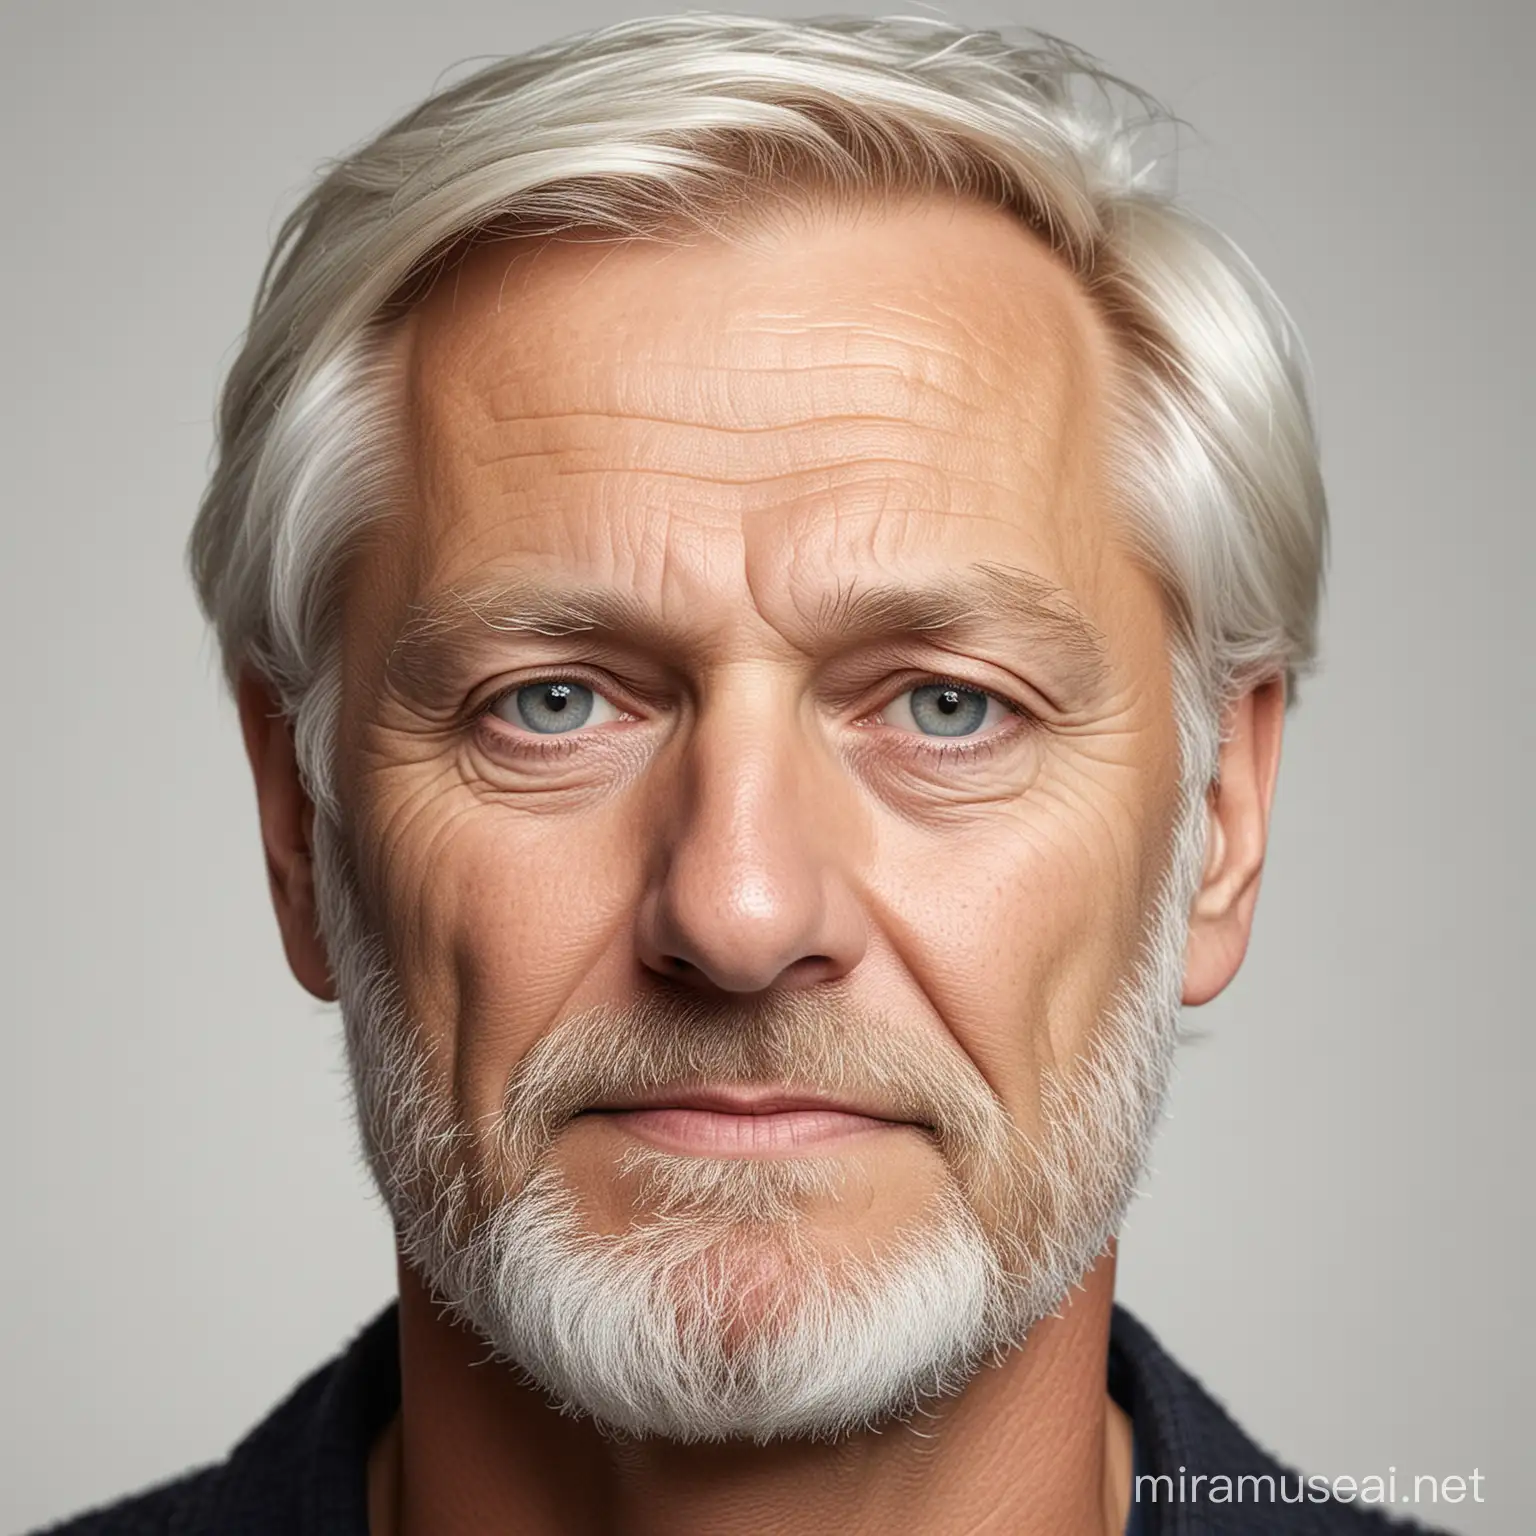 Portrait of a 55YearOld Man with Swedish Appearance Against White Background